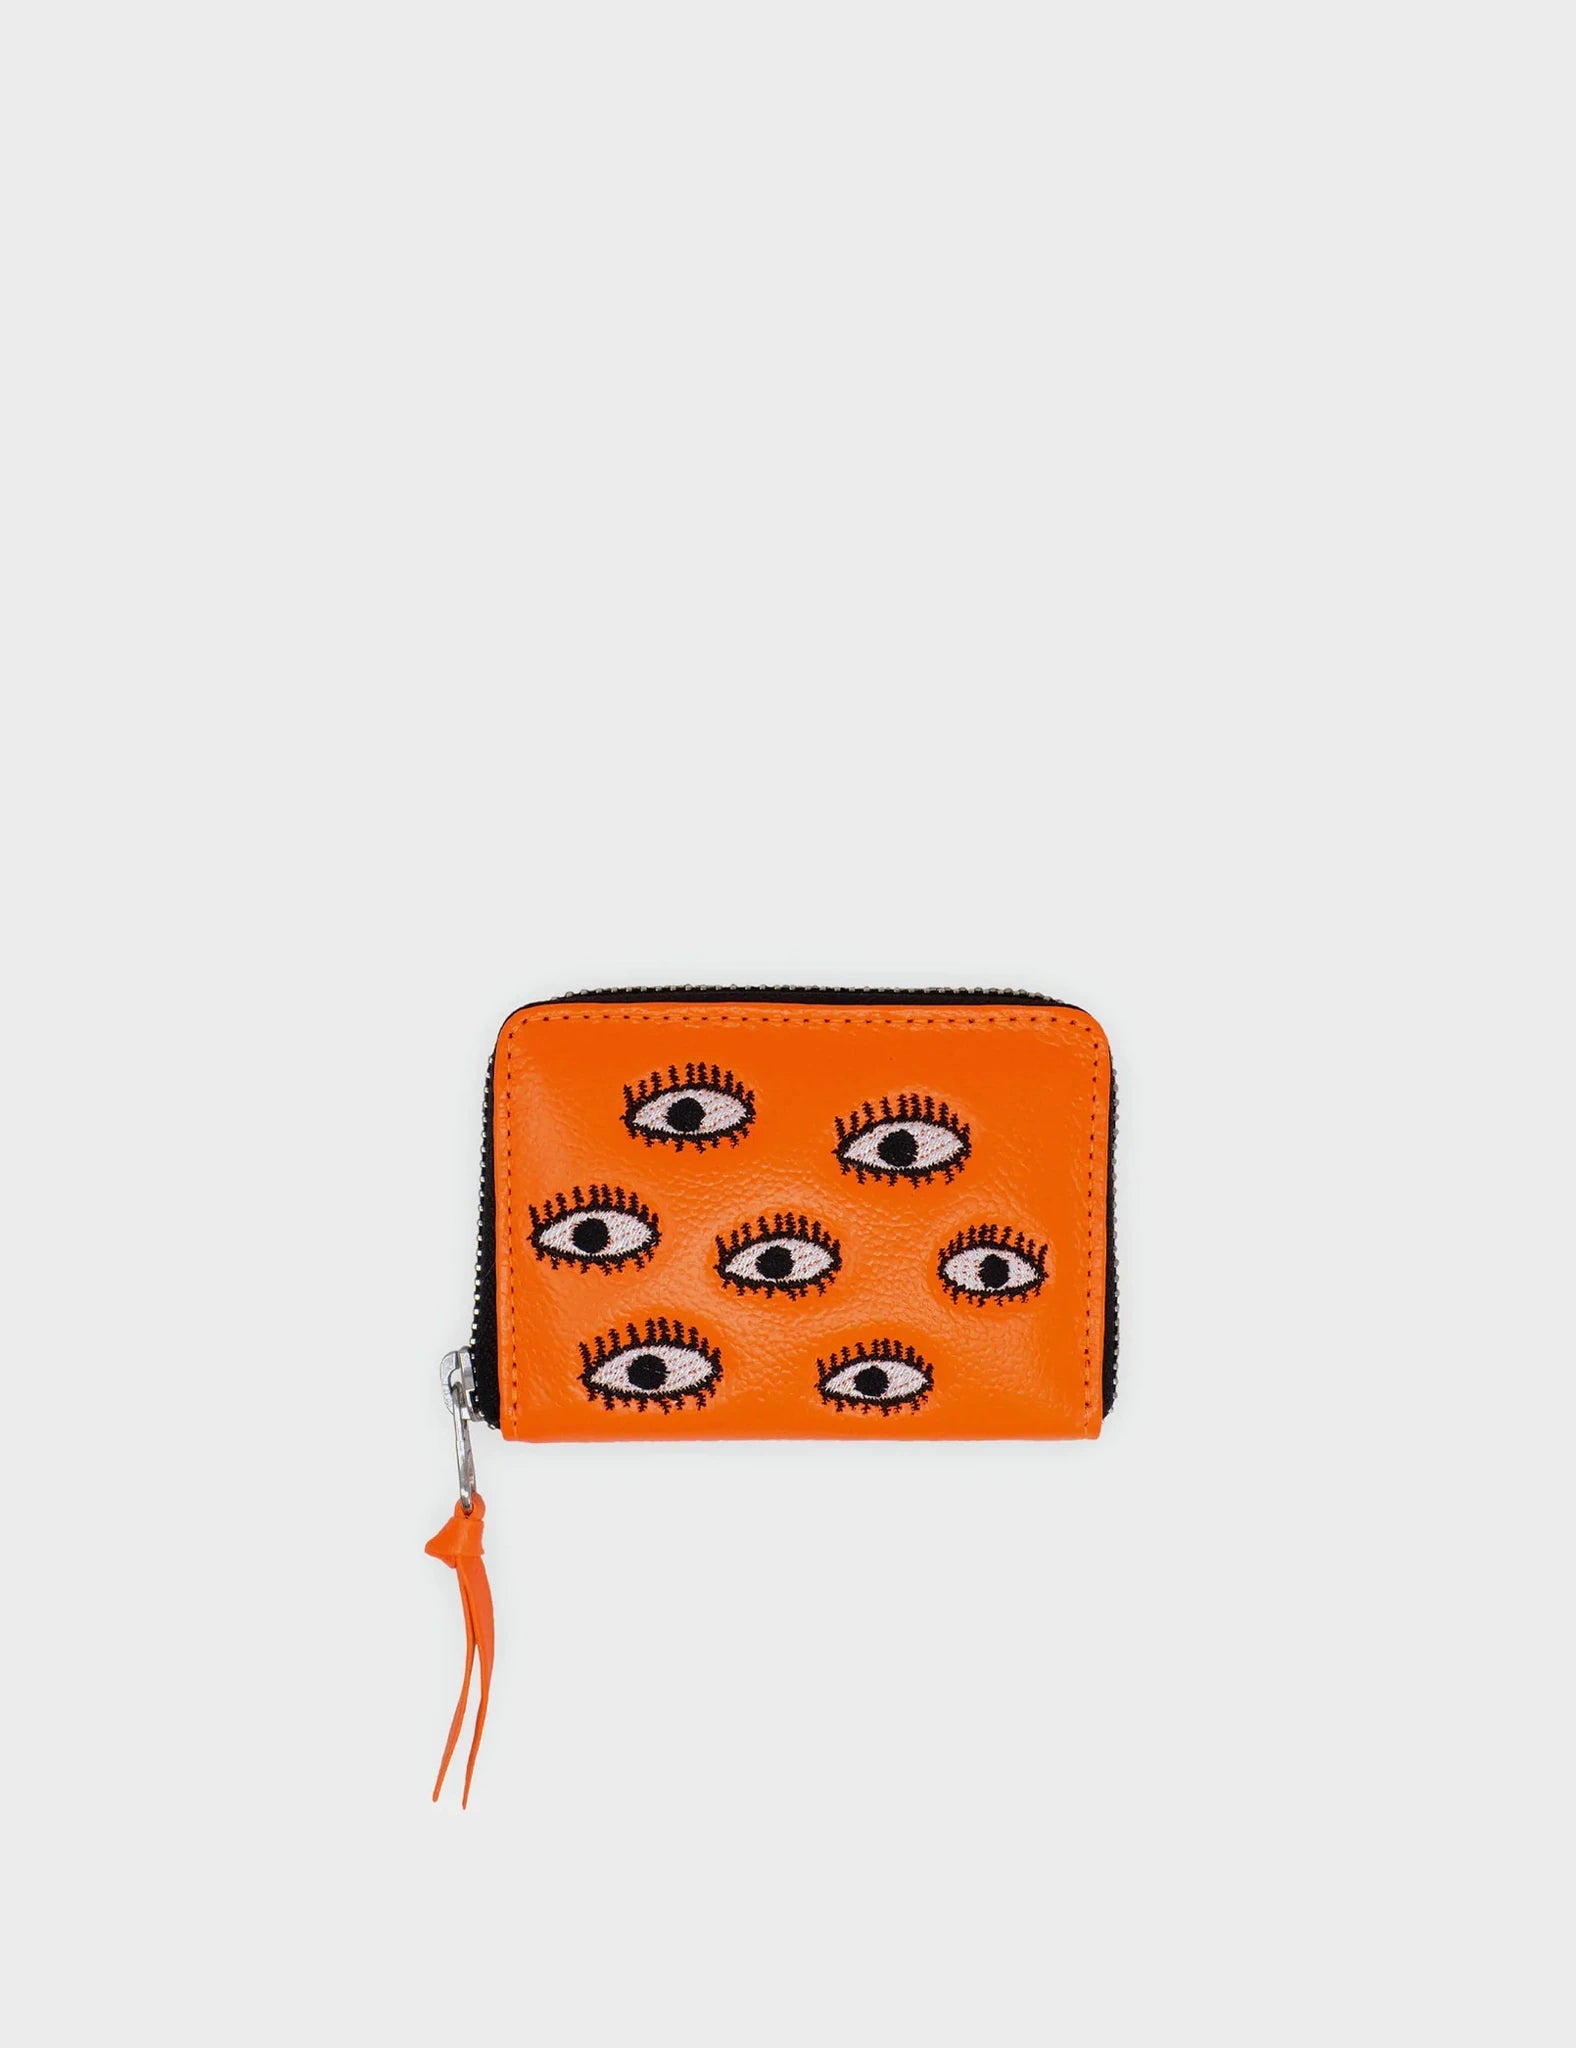 Frodo Neon Orange Leather Wallet - Eyes Embroidery - Front view